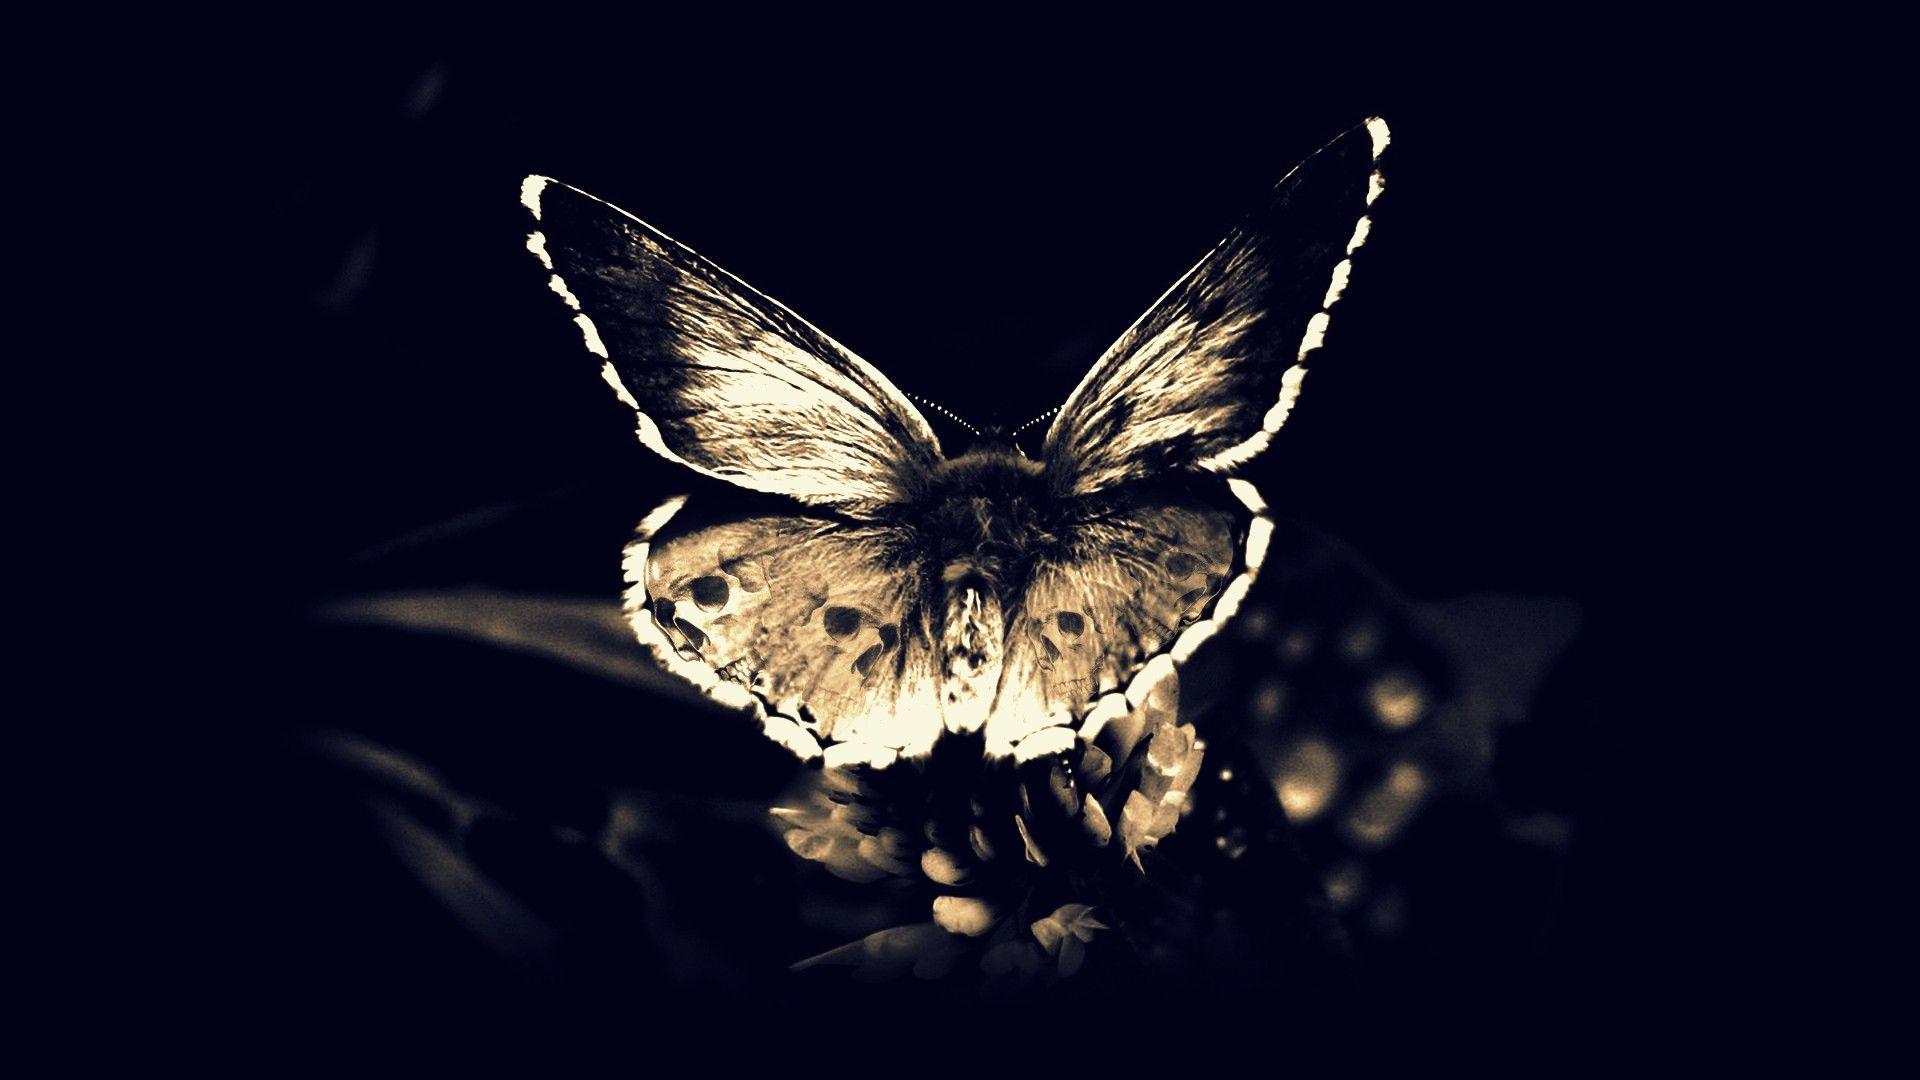 Moth Wallpaper for Free Download, 46 Moth HD Quality Wallpaper